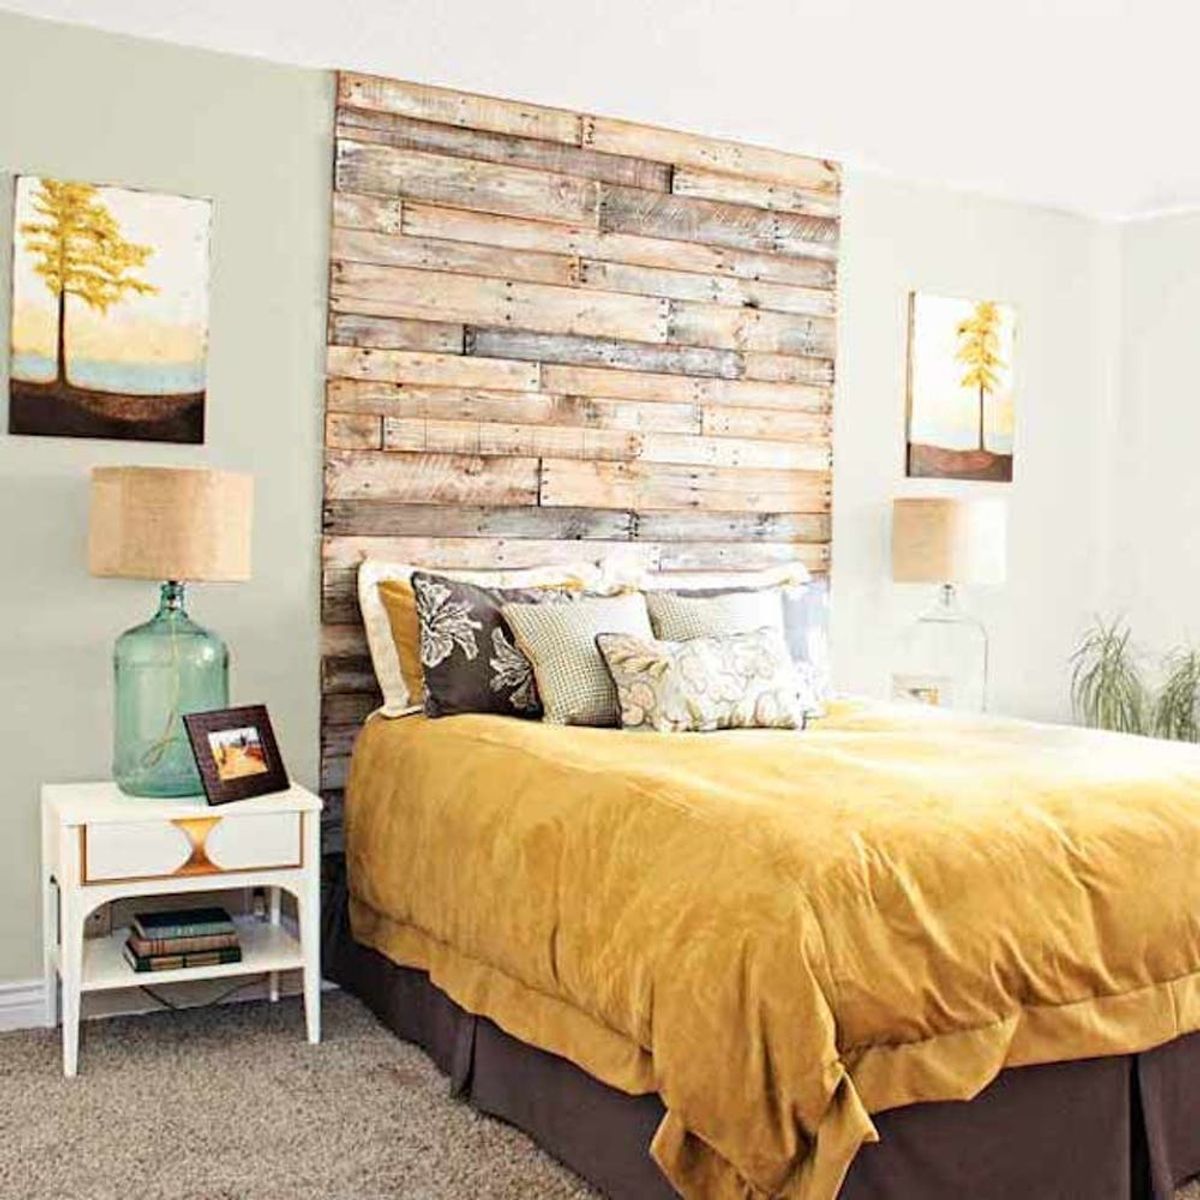 18 More Totally Pallet-able Ways to Repurpose Old Pallets